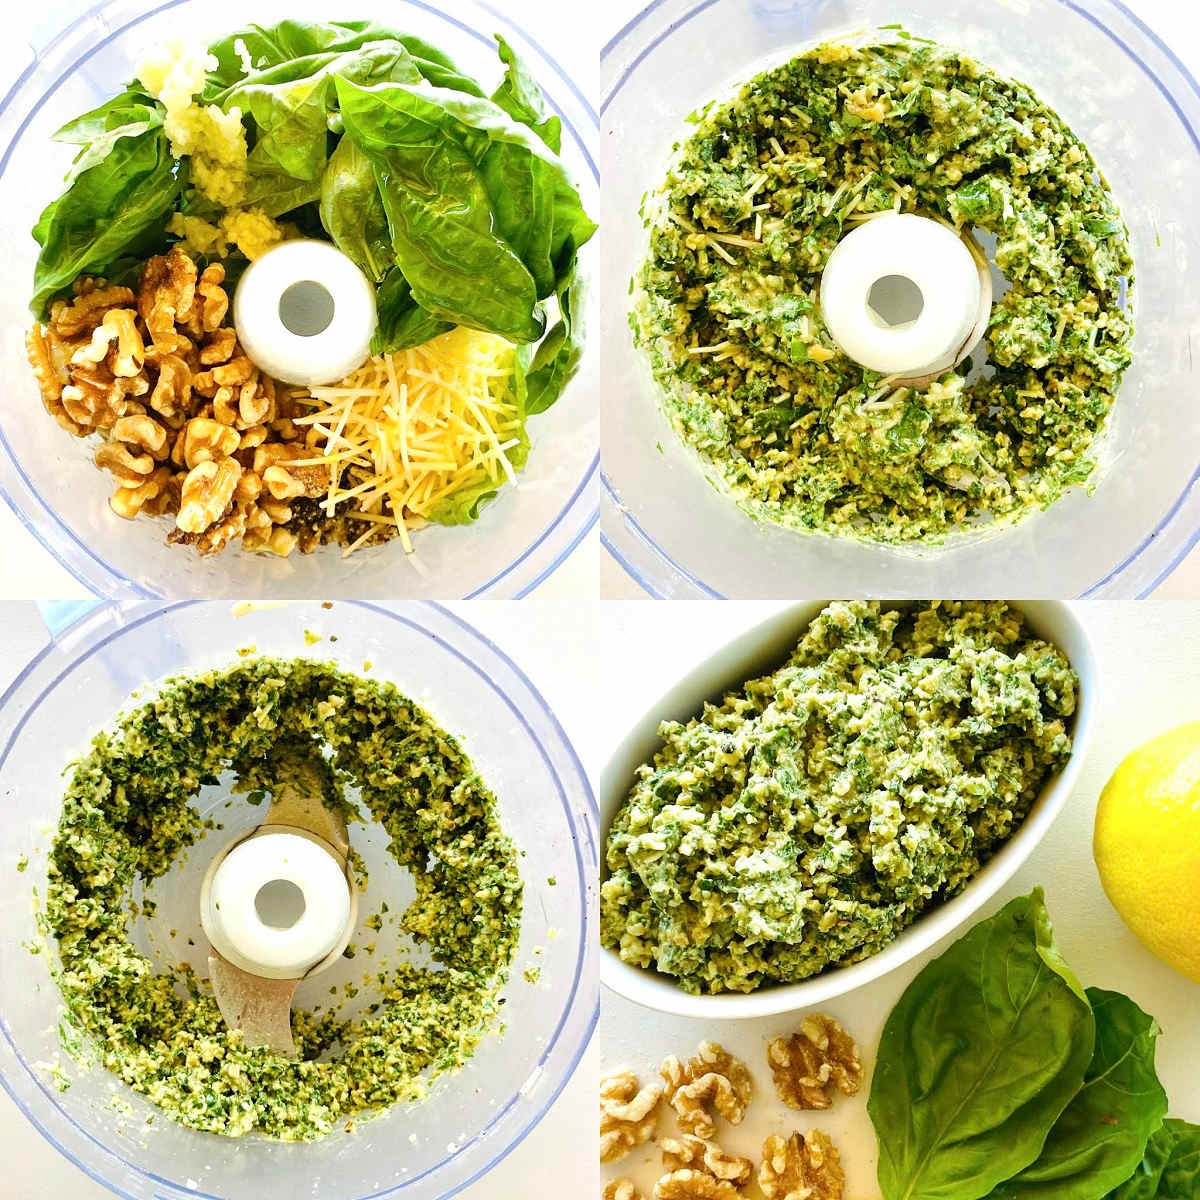 process shots 1 through 4 for how to make pesto without pine nuts.